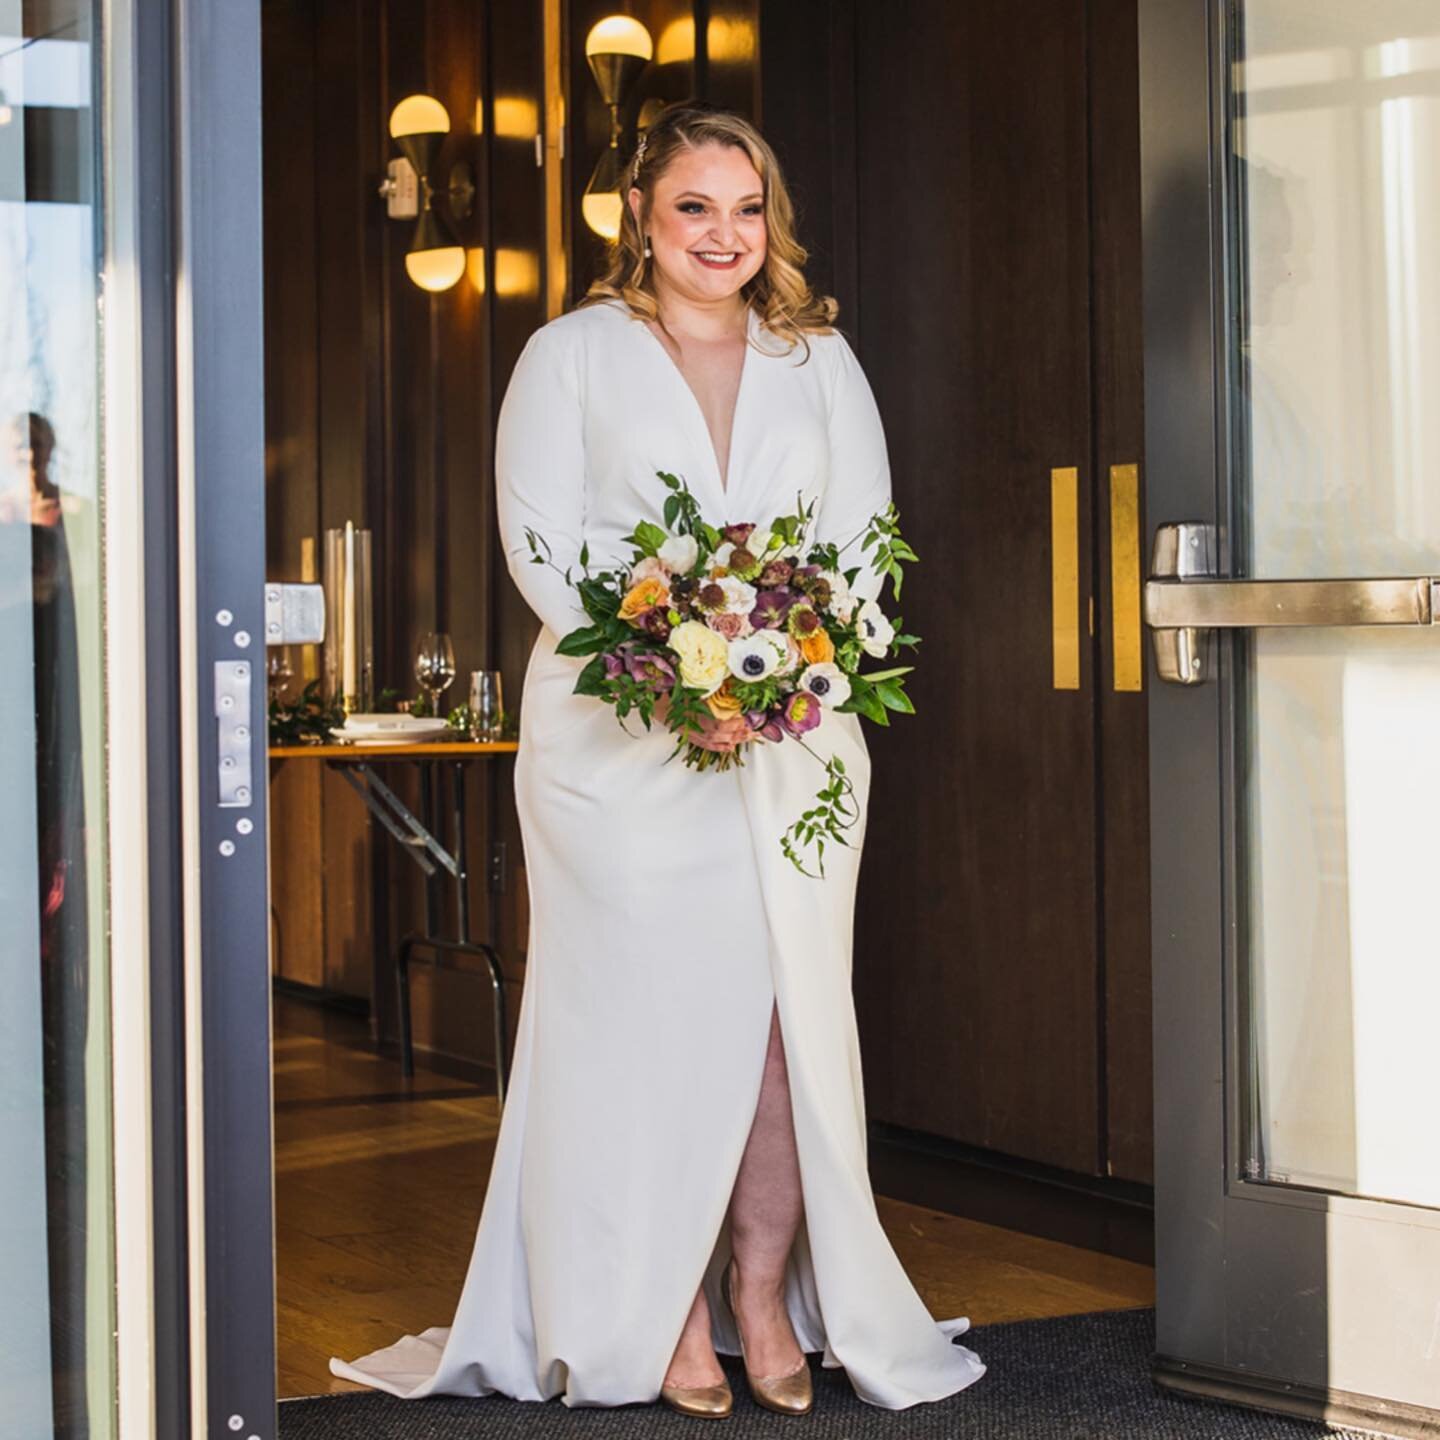 A moment for our gorgeous bride + her beautiful wedding party!! 🤩 Your wedding day starts with the &ldquo;getting ready&rdquo; process. This is always so much fun! We love pampering both you and your loved one. ⁣
⁣
One way to make sure everything ru